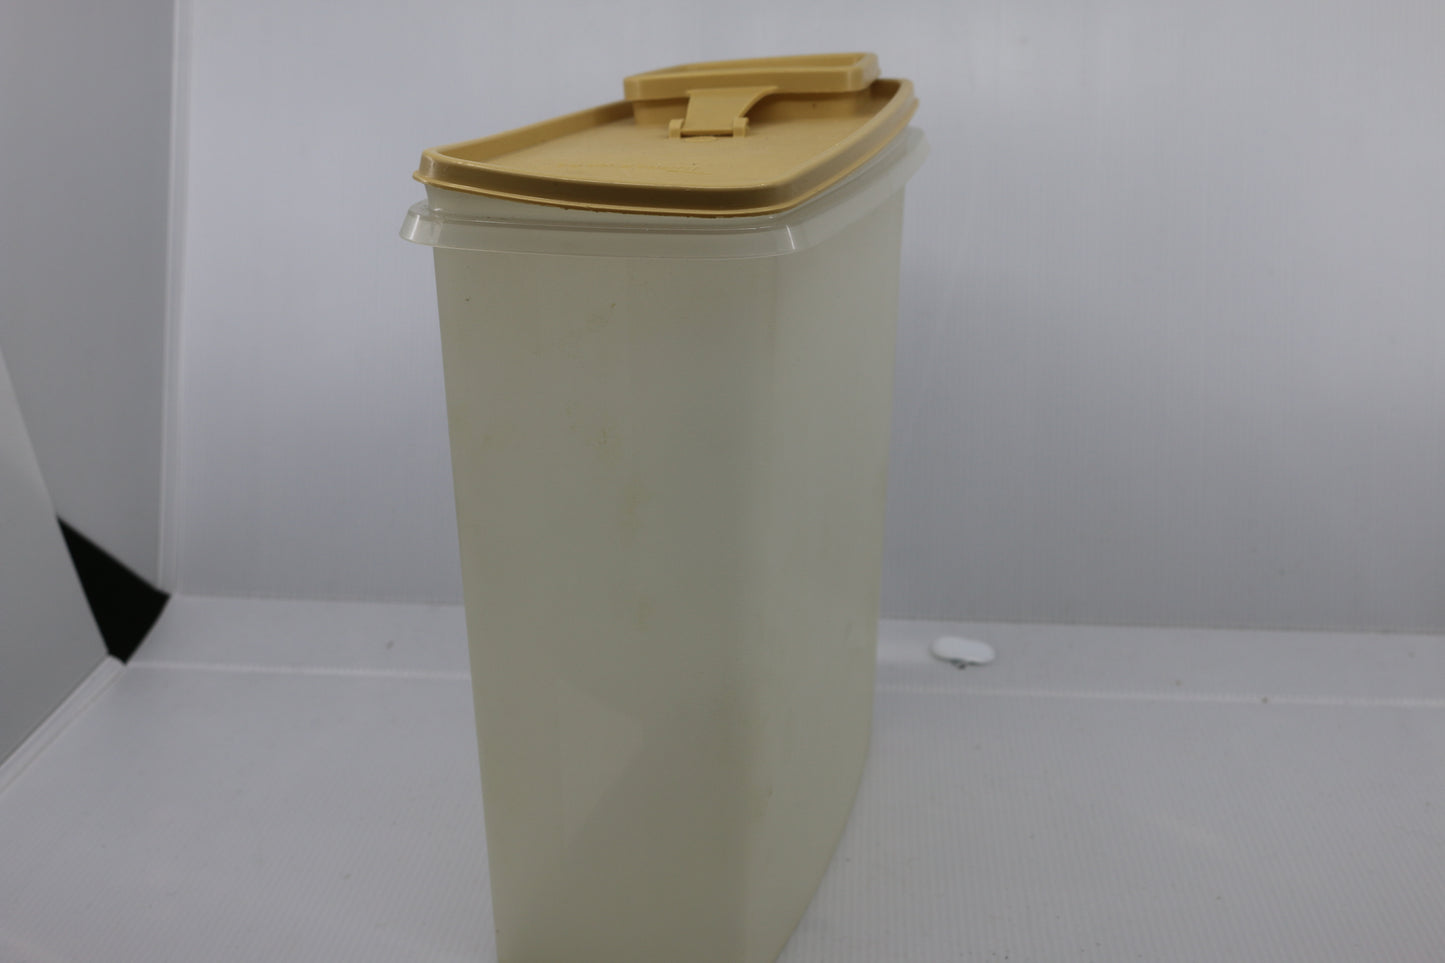 Vintage TUPPERWARE 1590-8 Tan Plastic Cereal Keeper containers with Lid